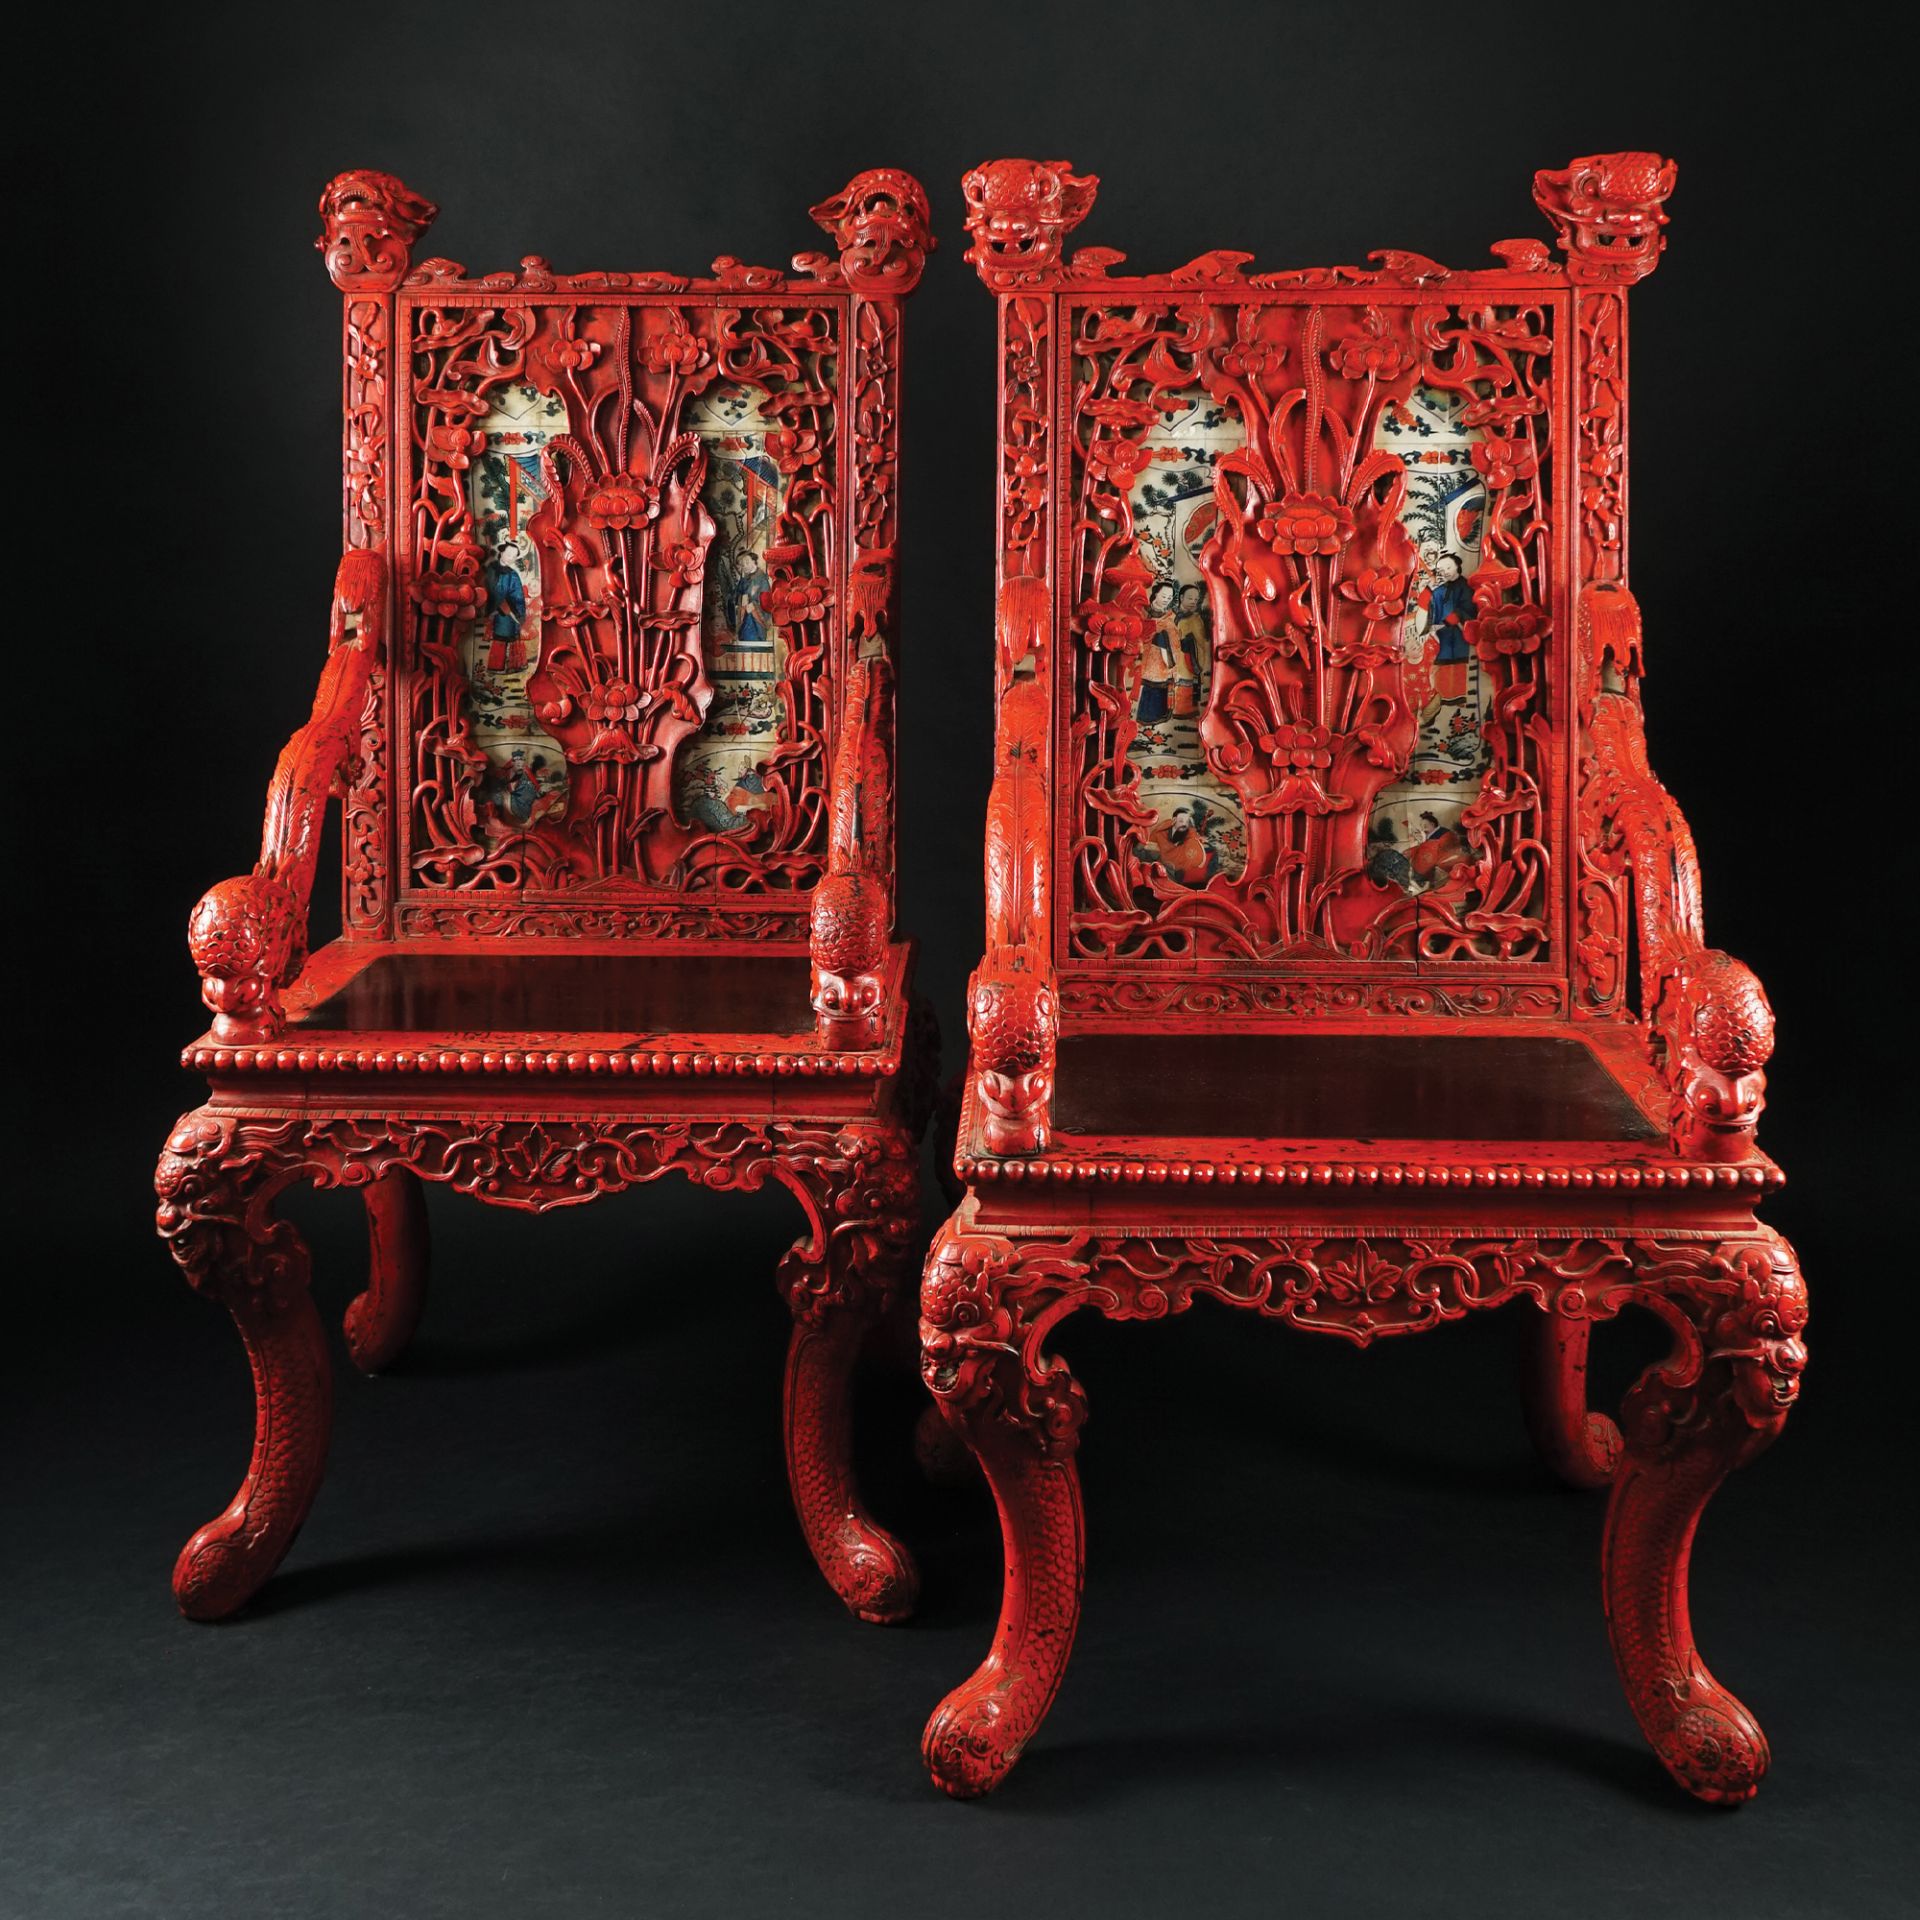 A pair of Chinese red lacquered carved wood armchairs, early 20th century